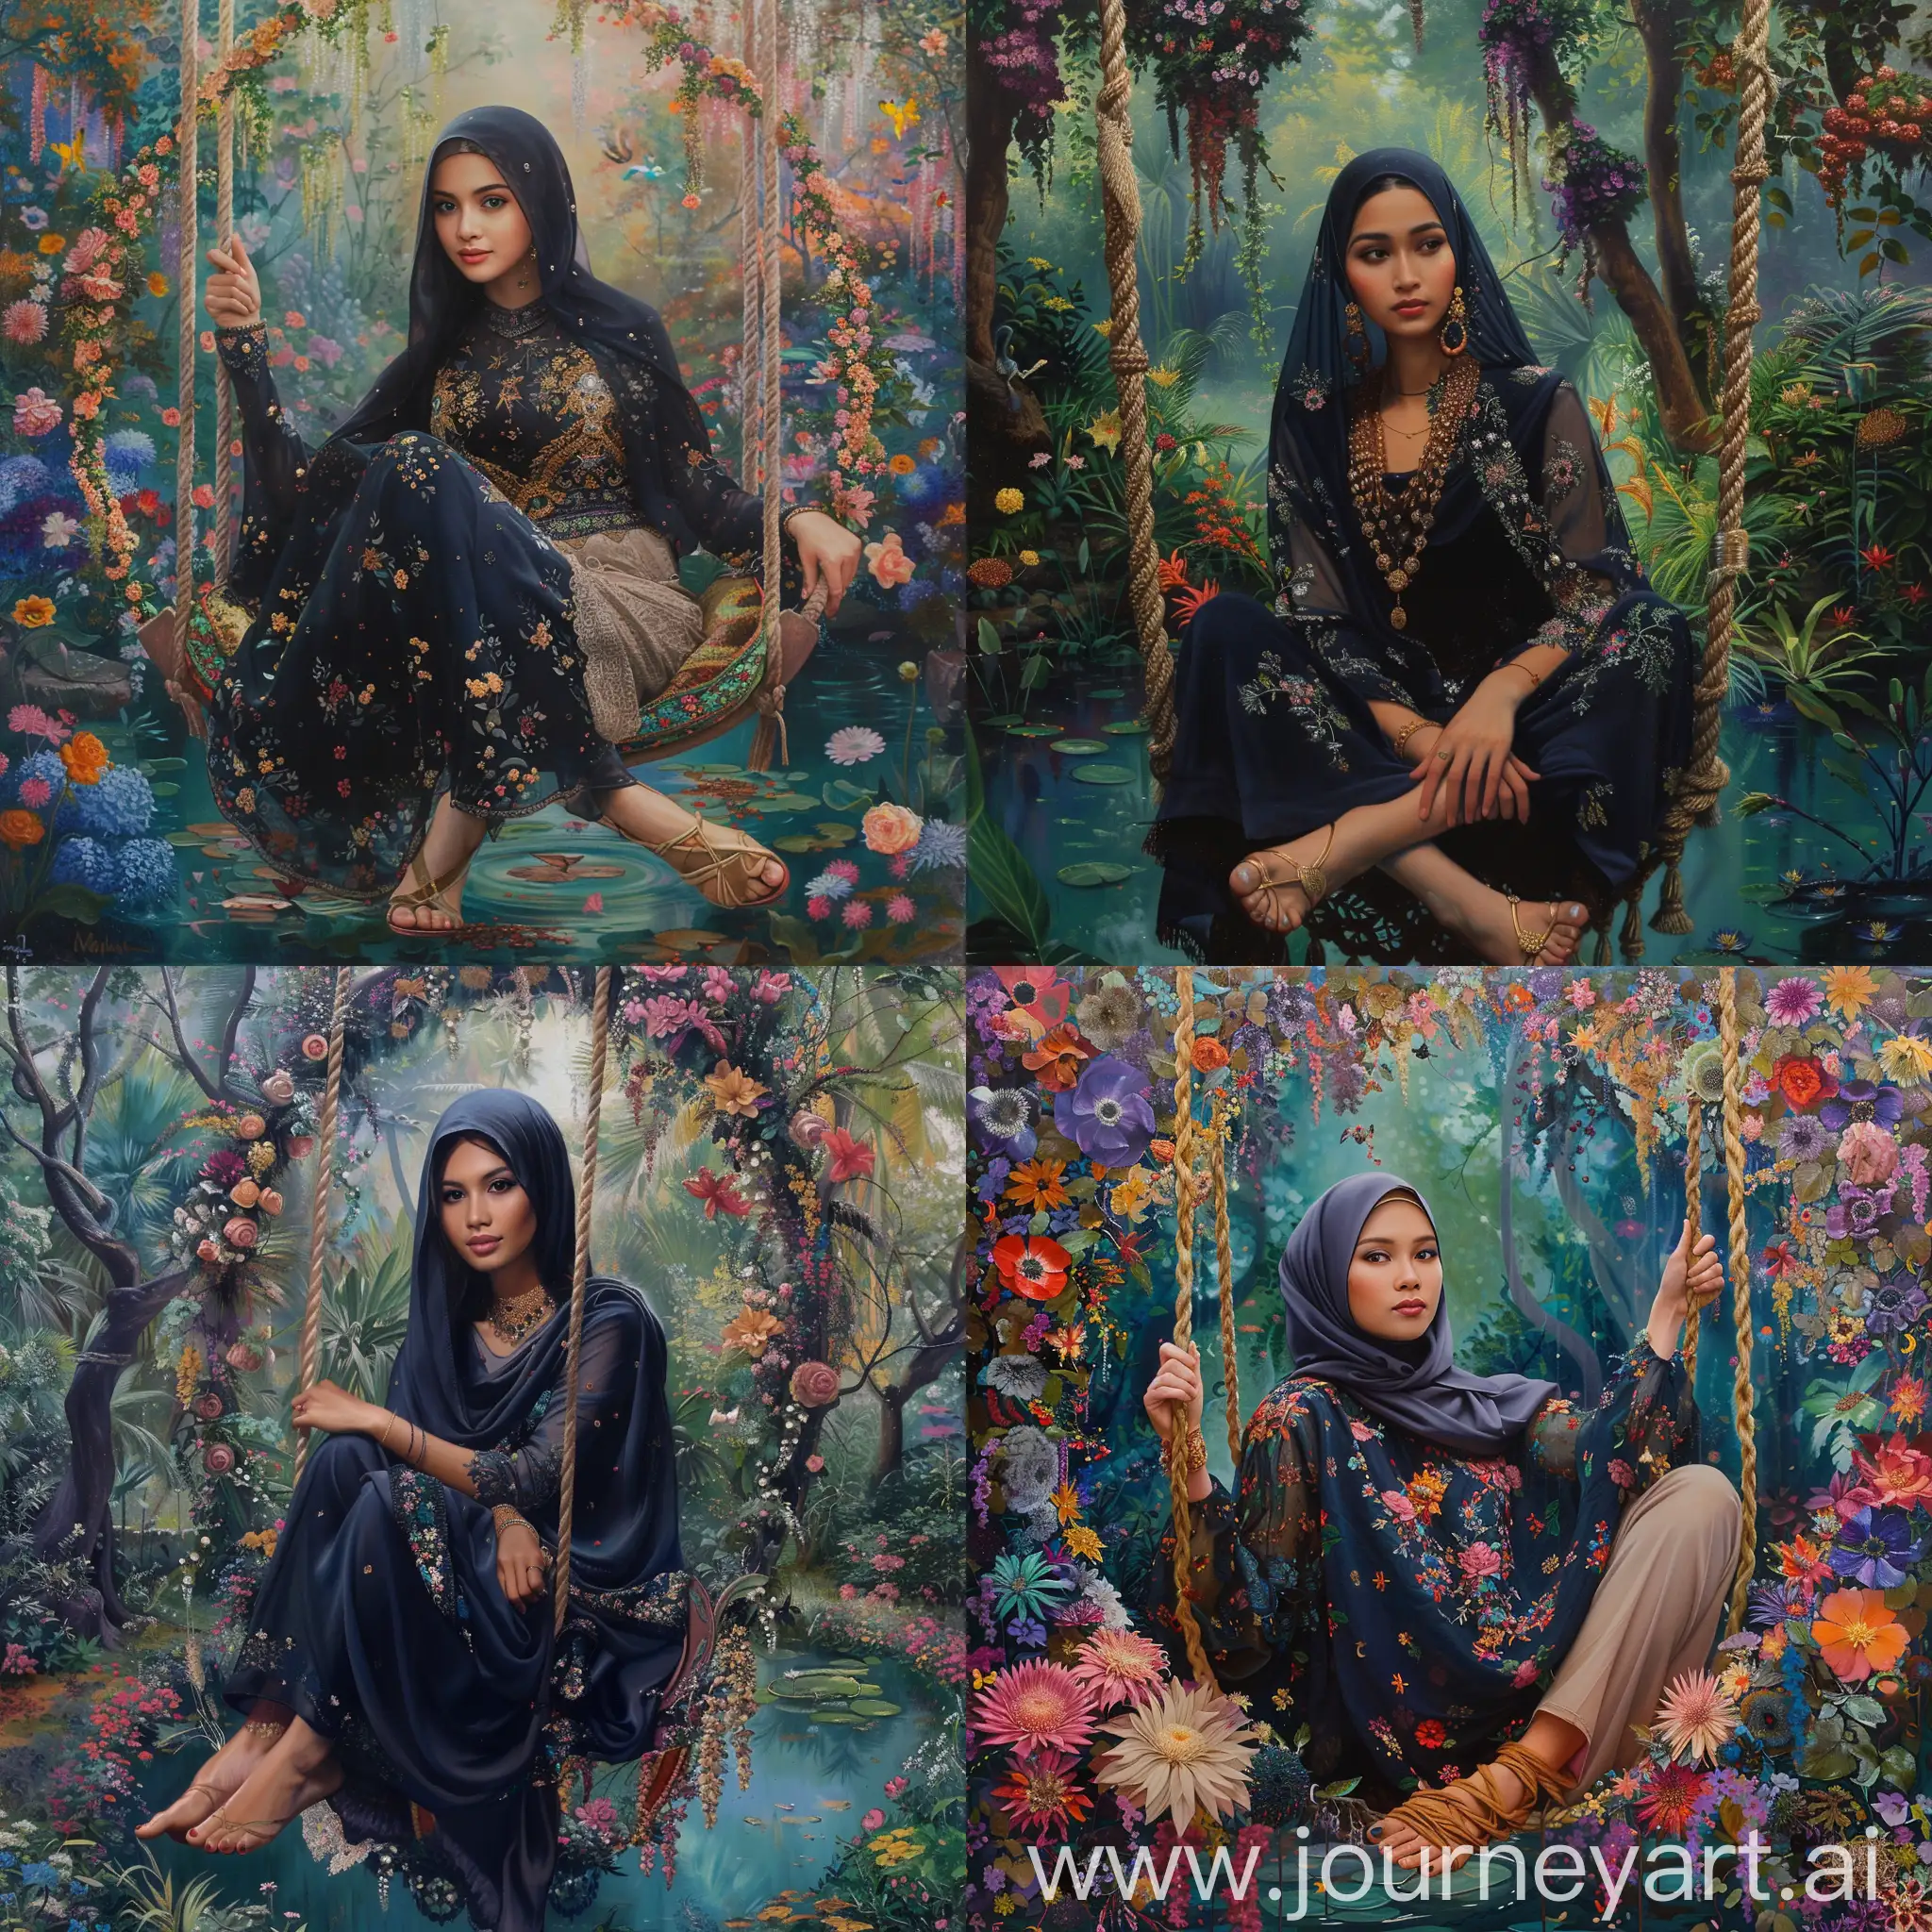 Indonesian-Woman-in-Navy-Abaya-Sitting-on-Floral-Swing-by-Colorful-Pond